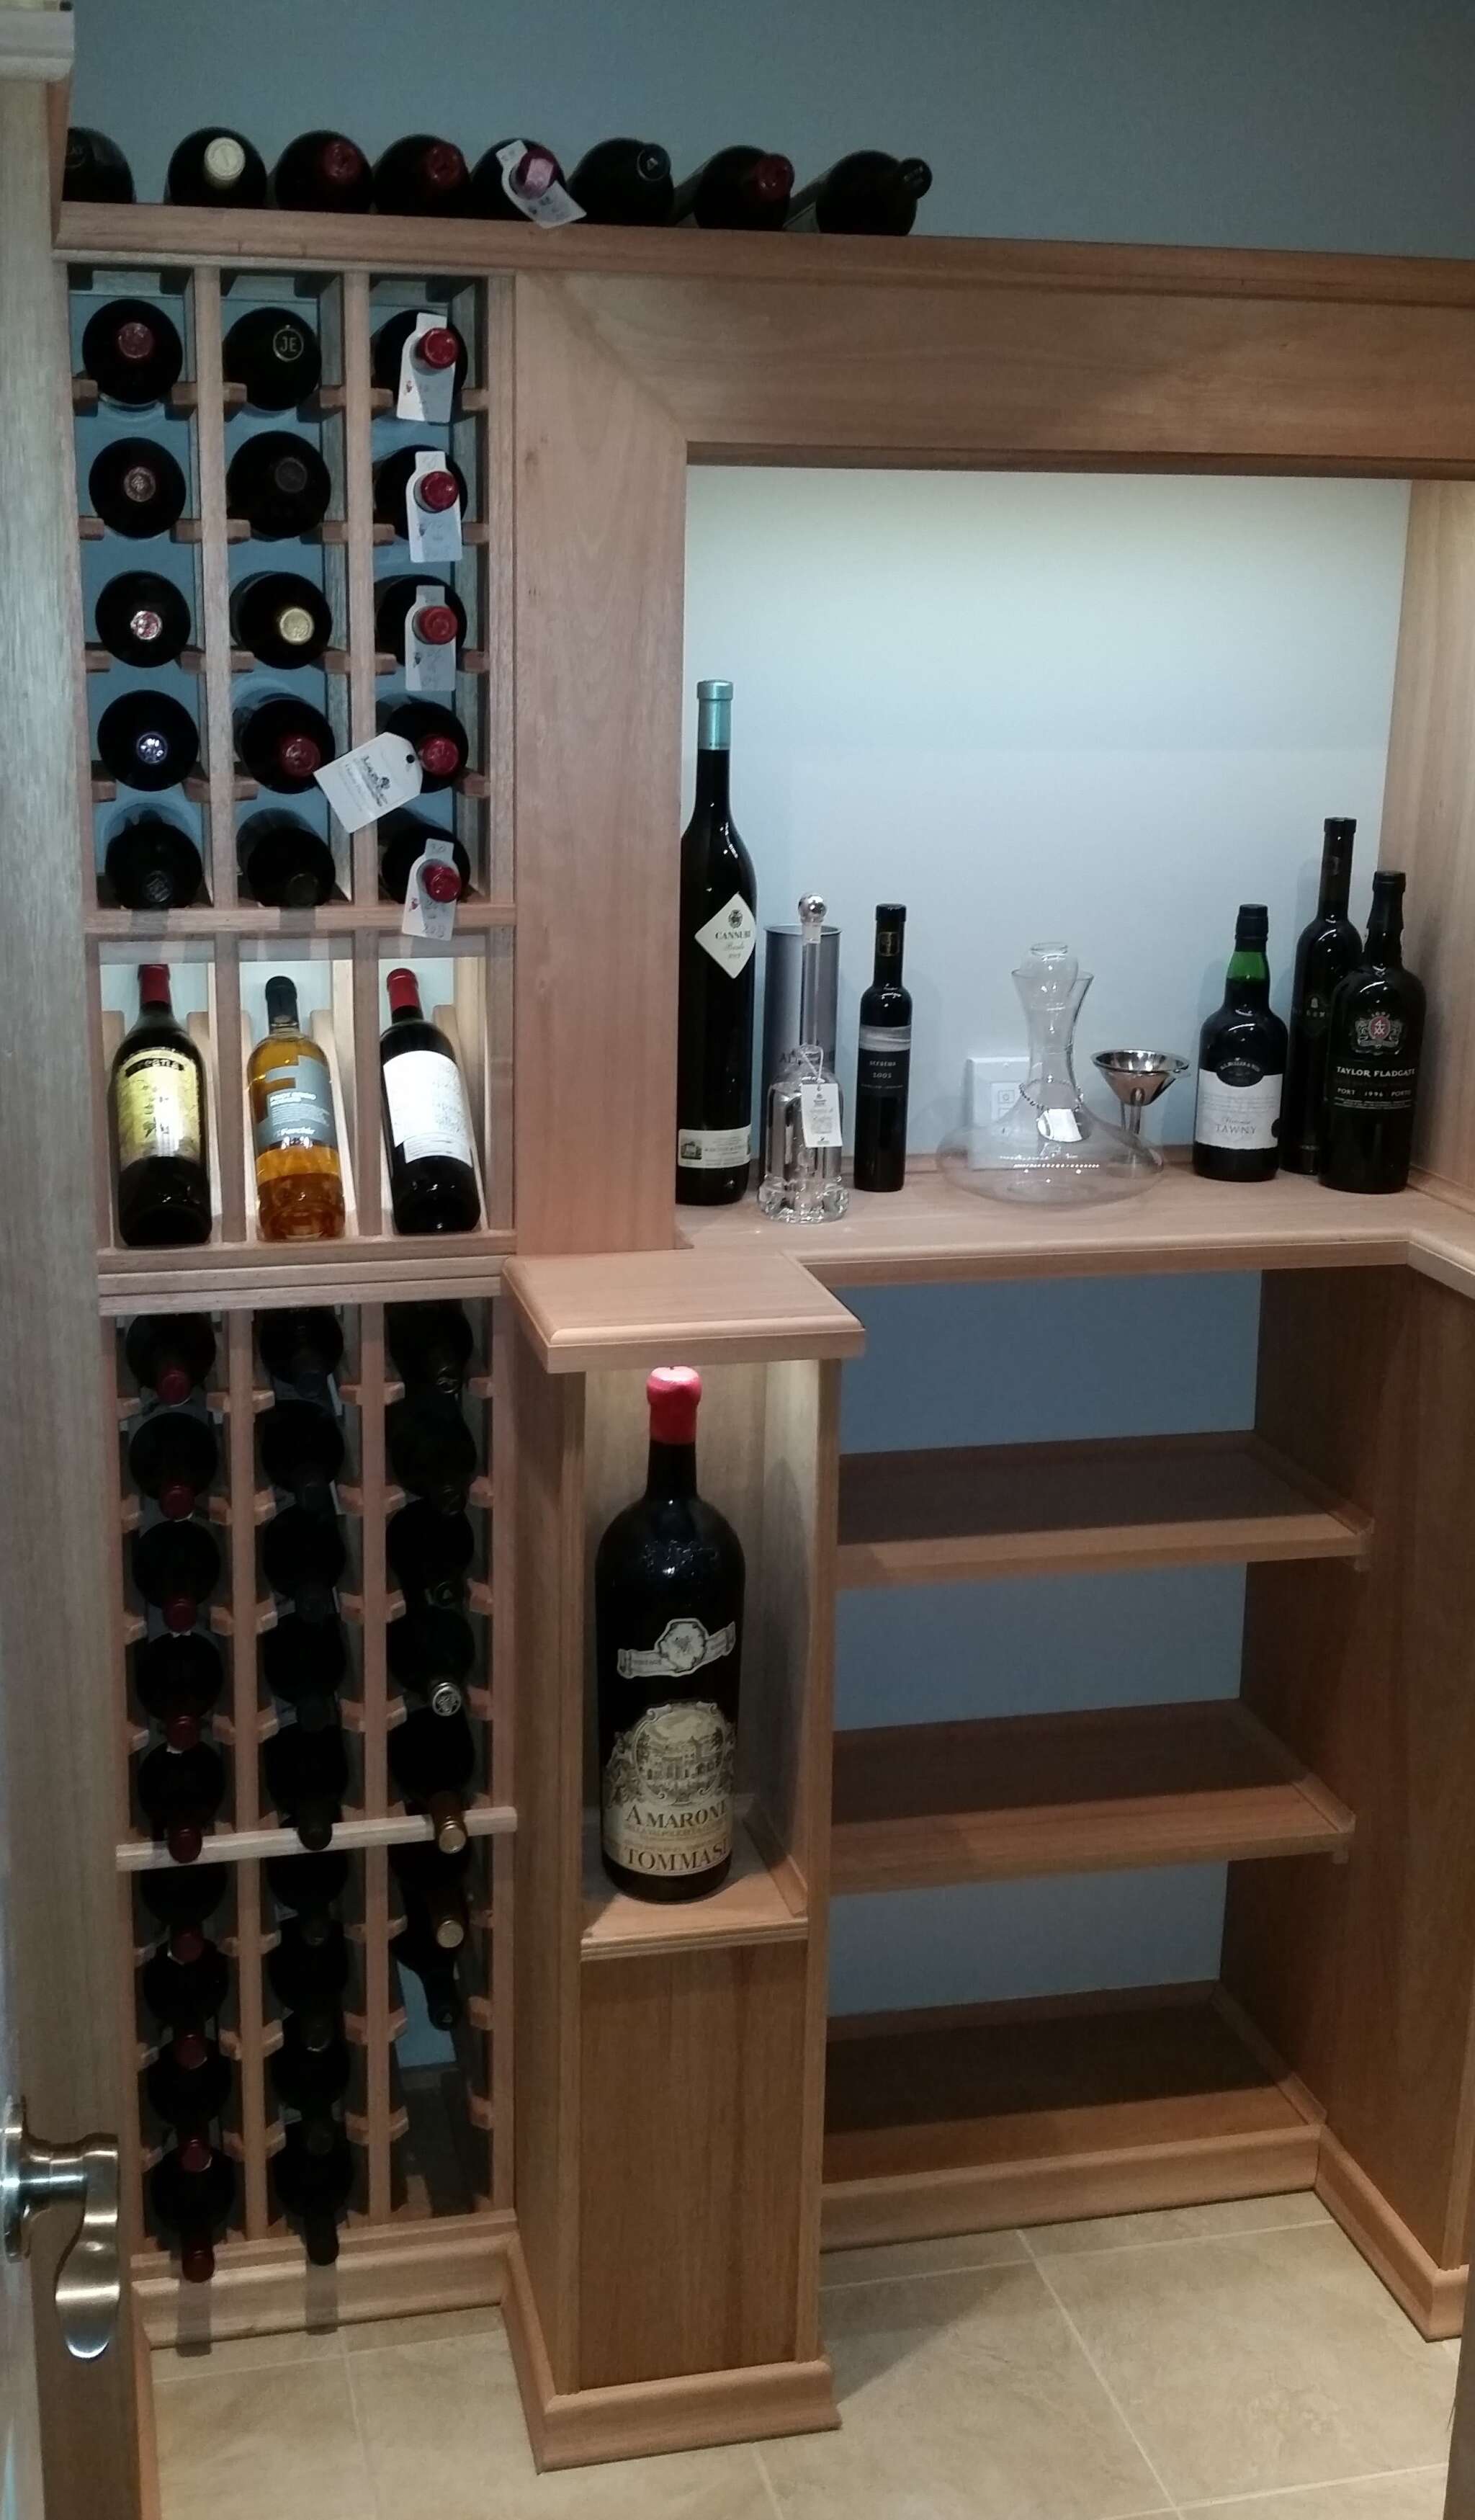 VWC custom racking system. Features LED highlights,"Jeroboam" bottle displays and plumbing concealment.